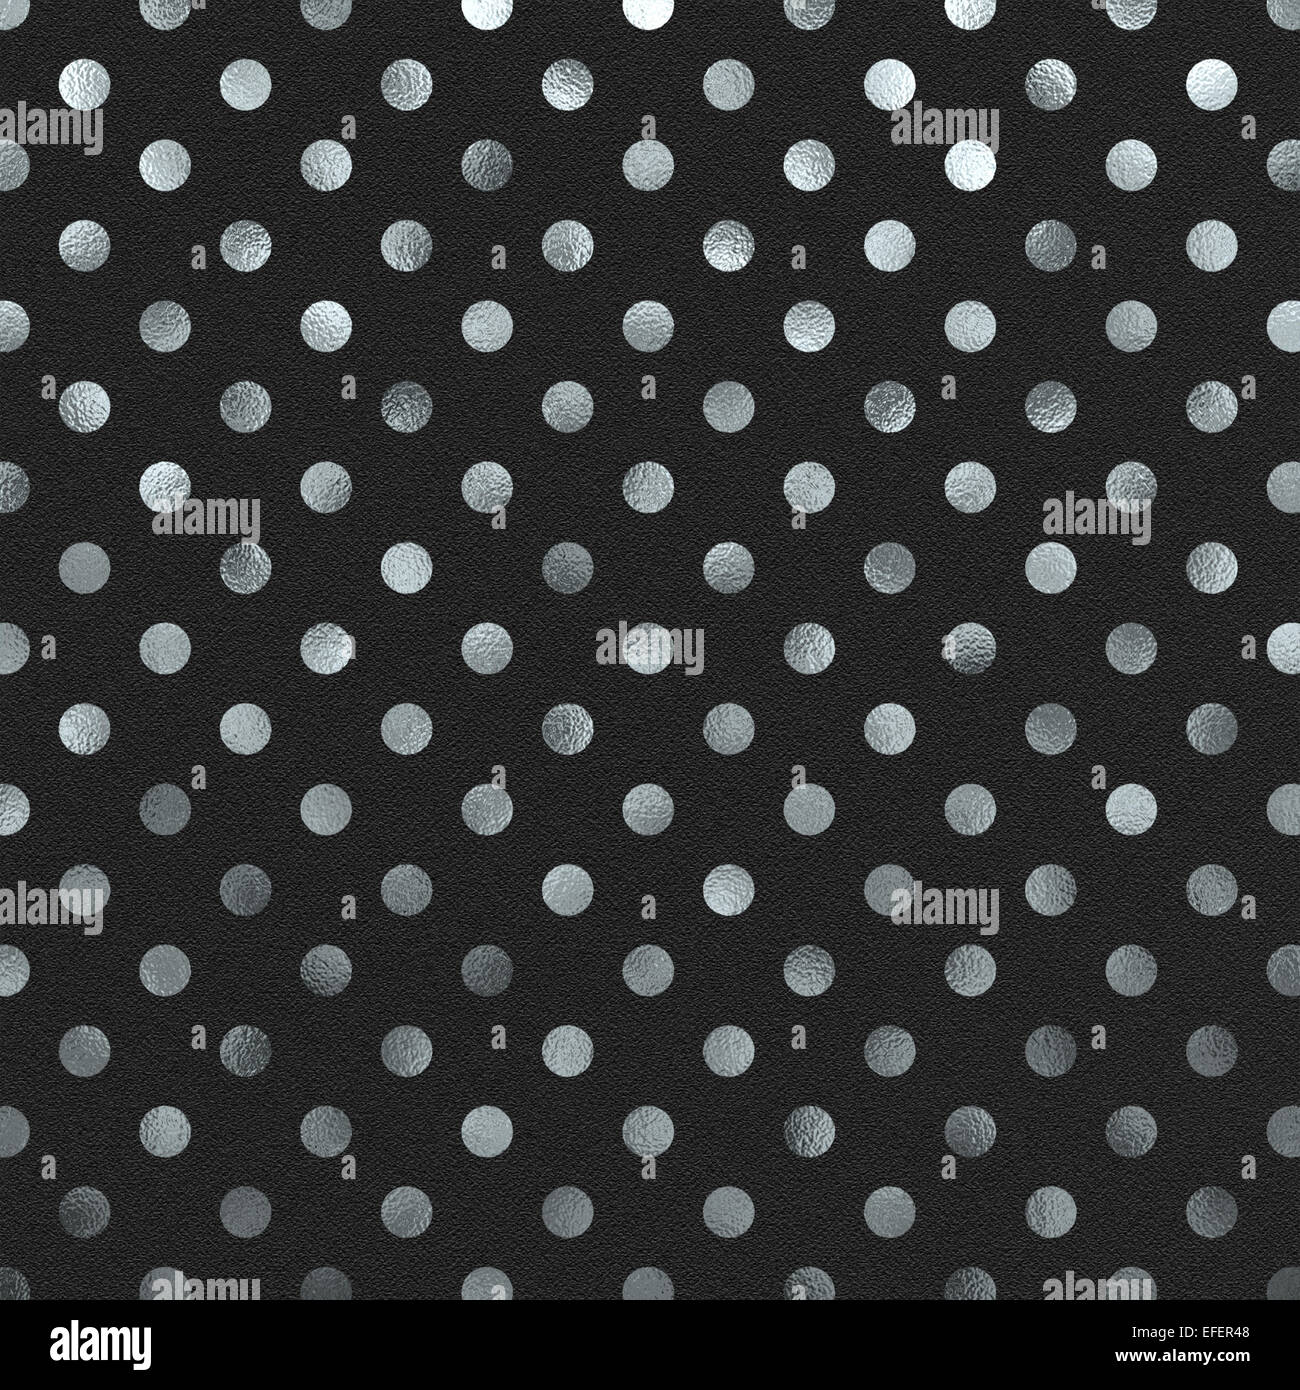 Silver and Black Polka Dot Pattern Swiss Dots Texture Digital Paper Background Stock Photo